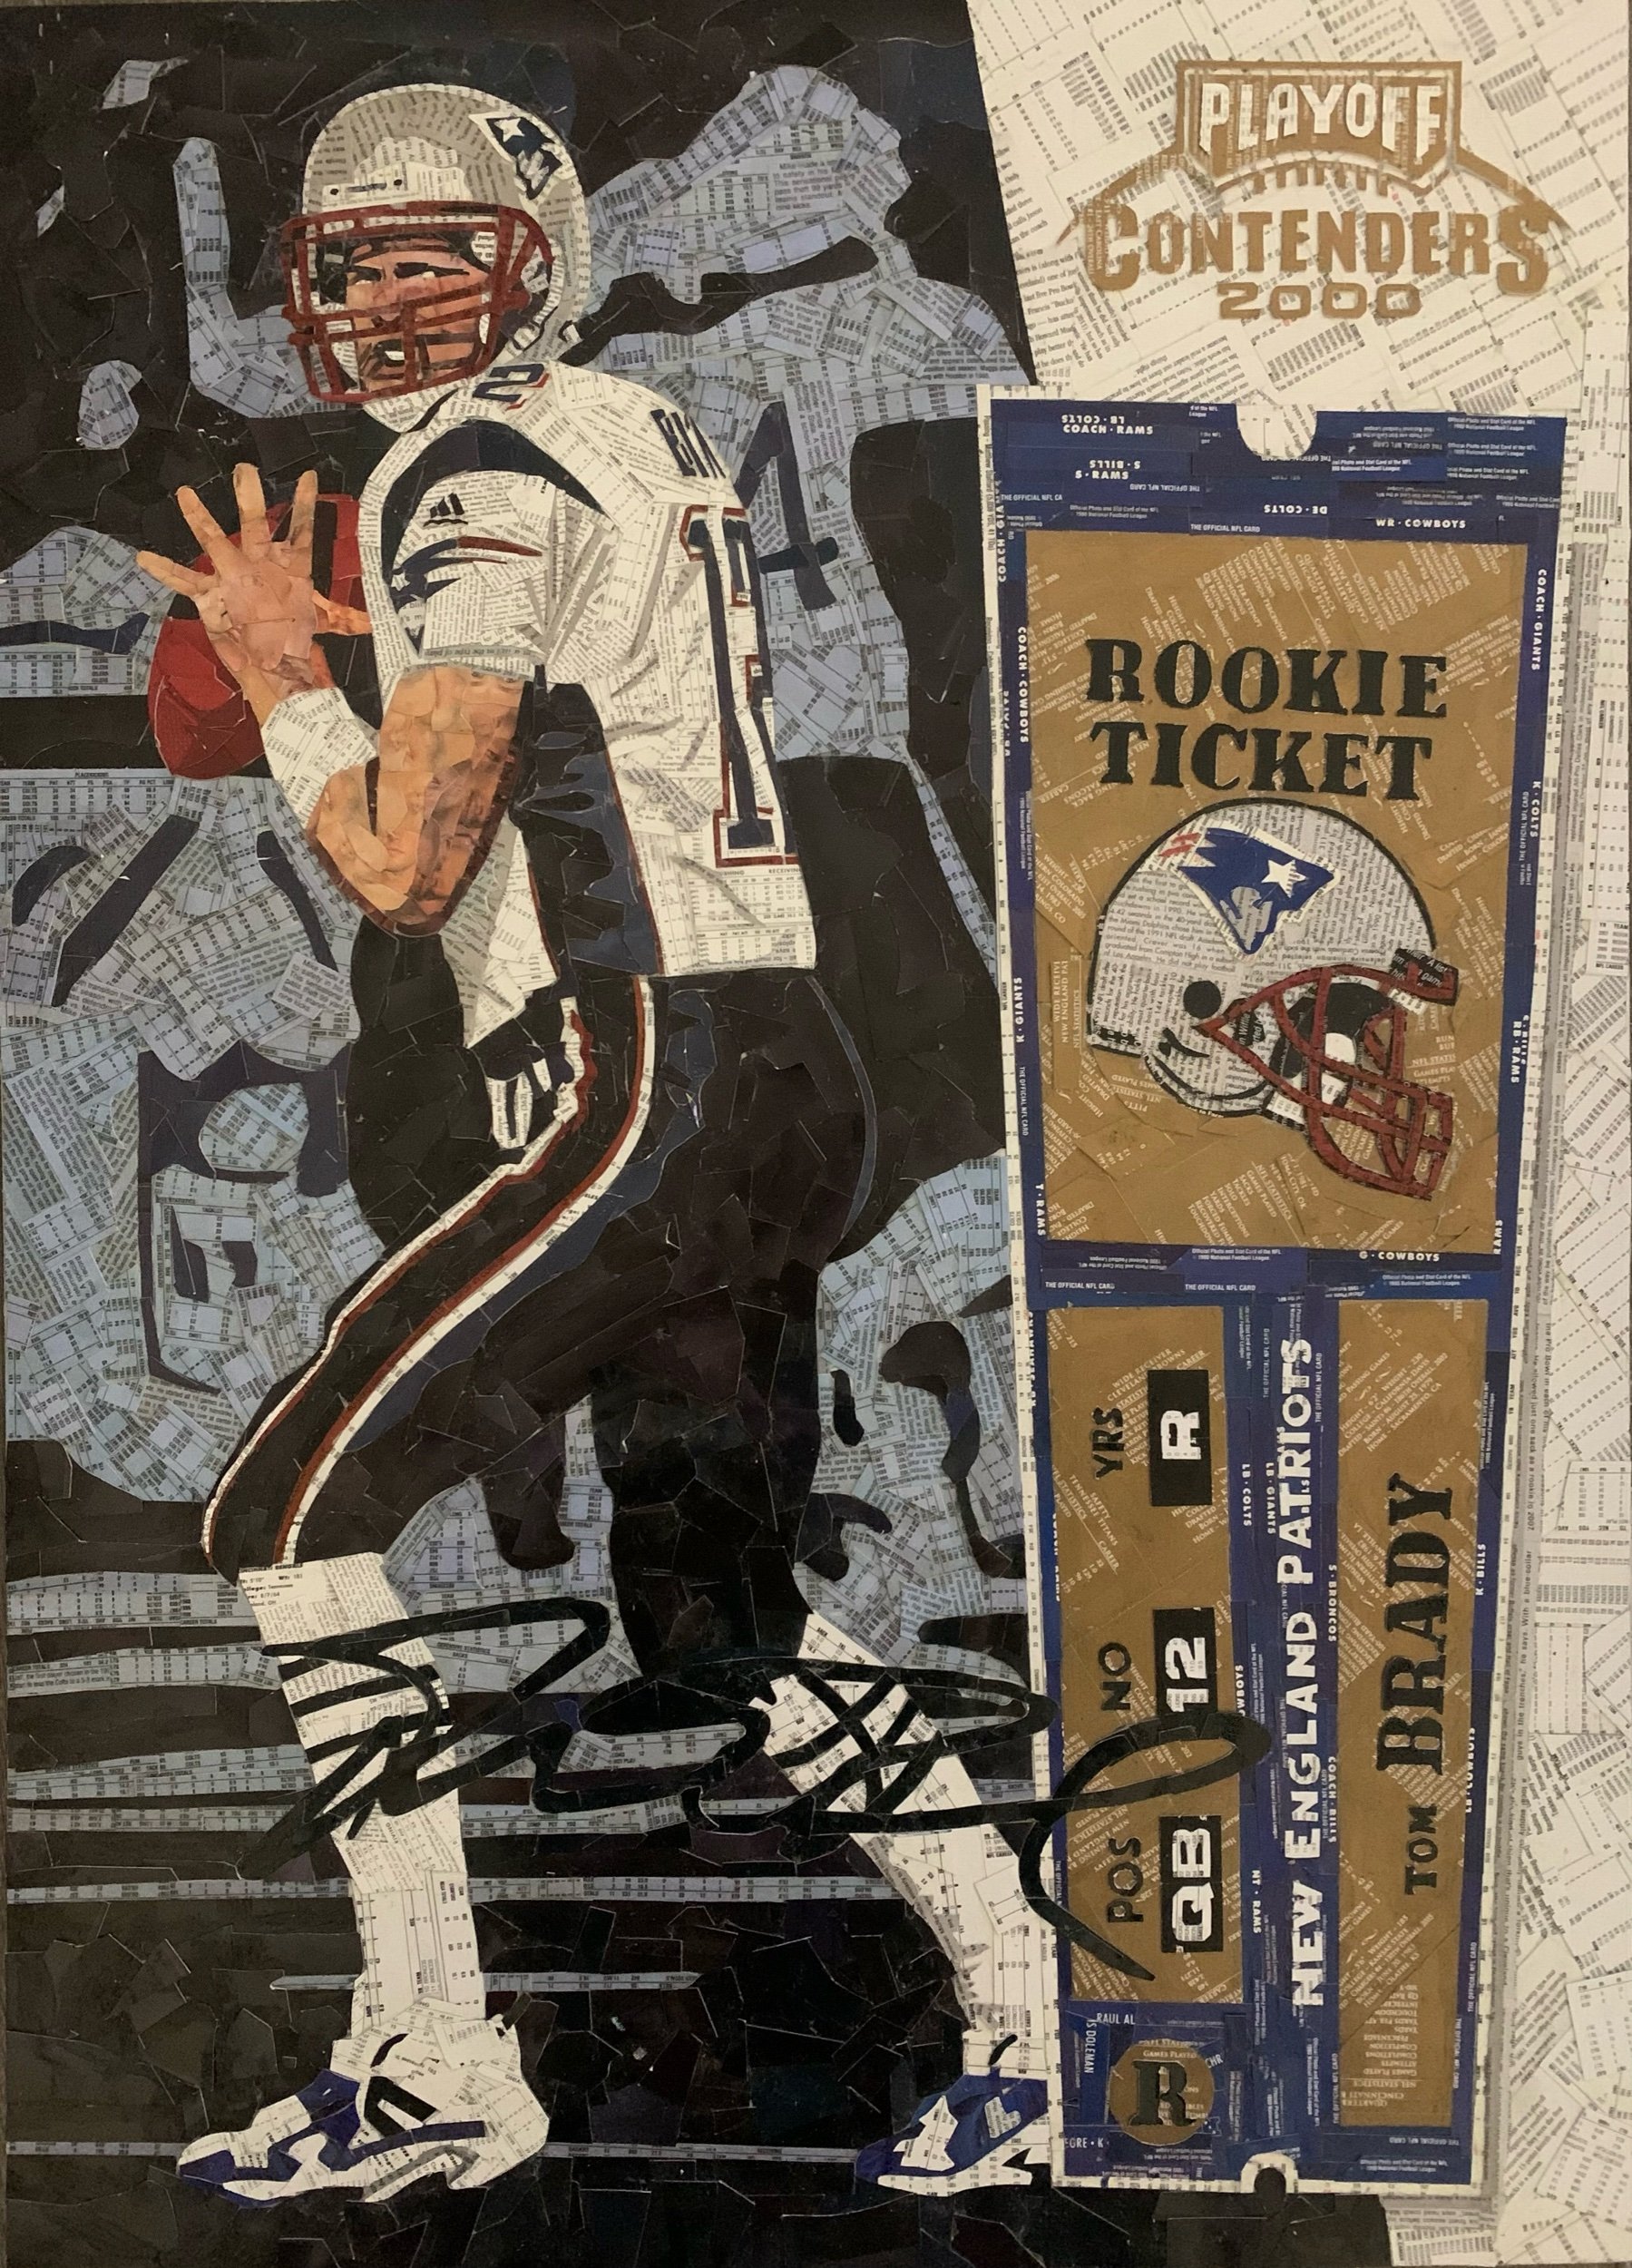 2000 Playoff Contenders Tom Brady Autograph